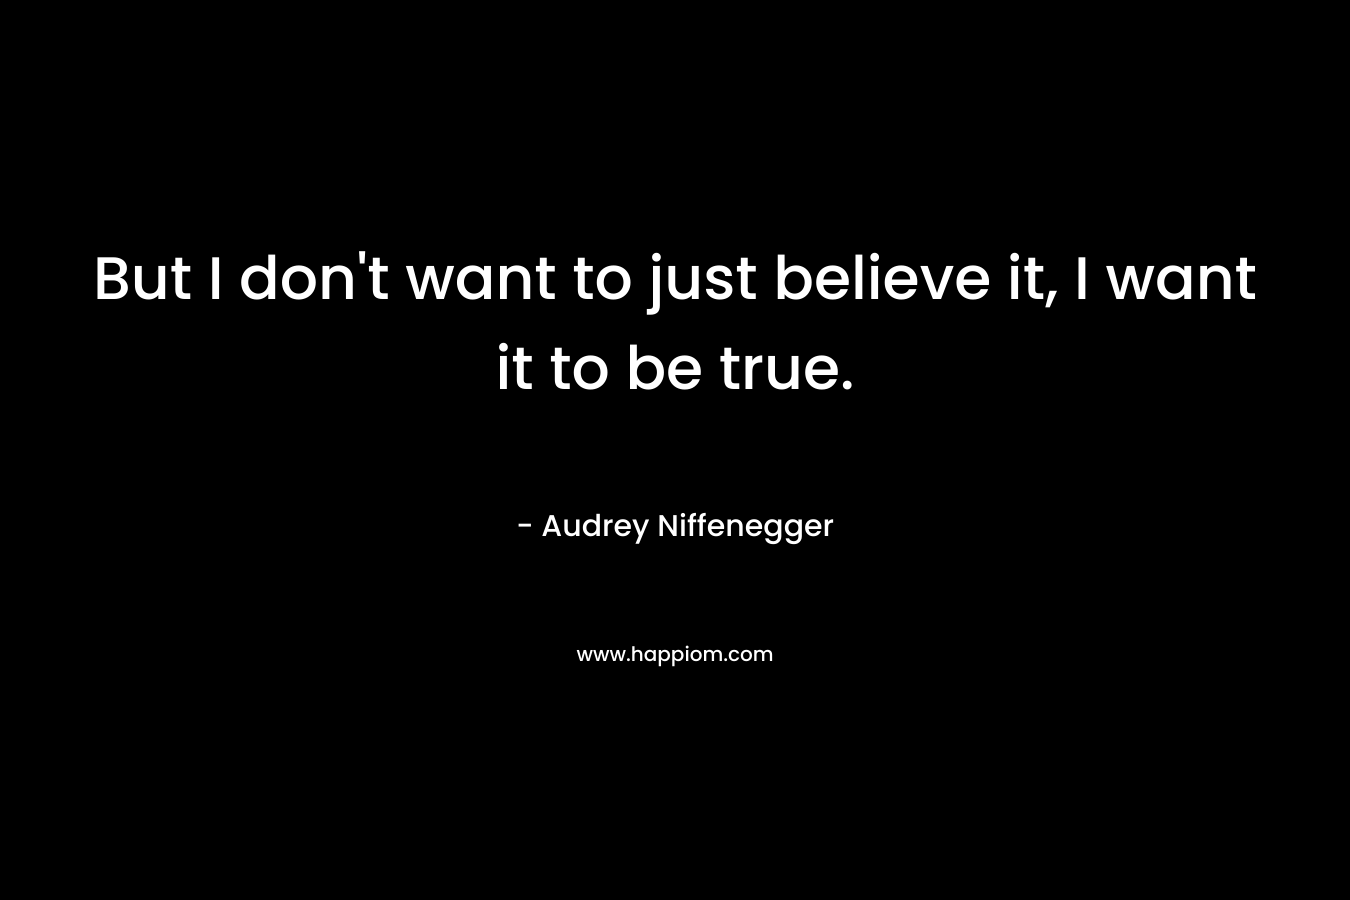 But I don’t want to just believe it, I want it to be true. – Audrey Niffenegger